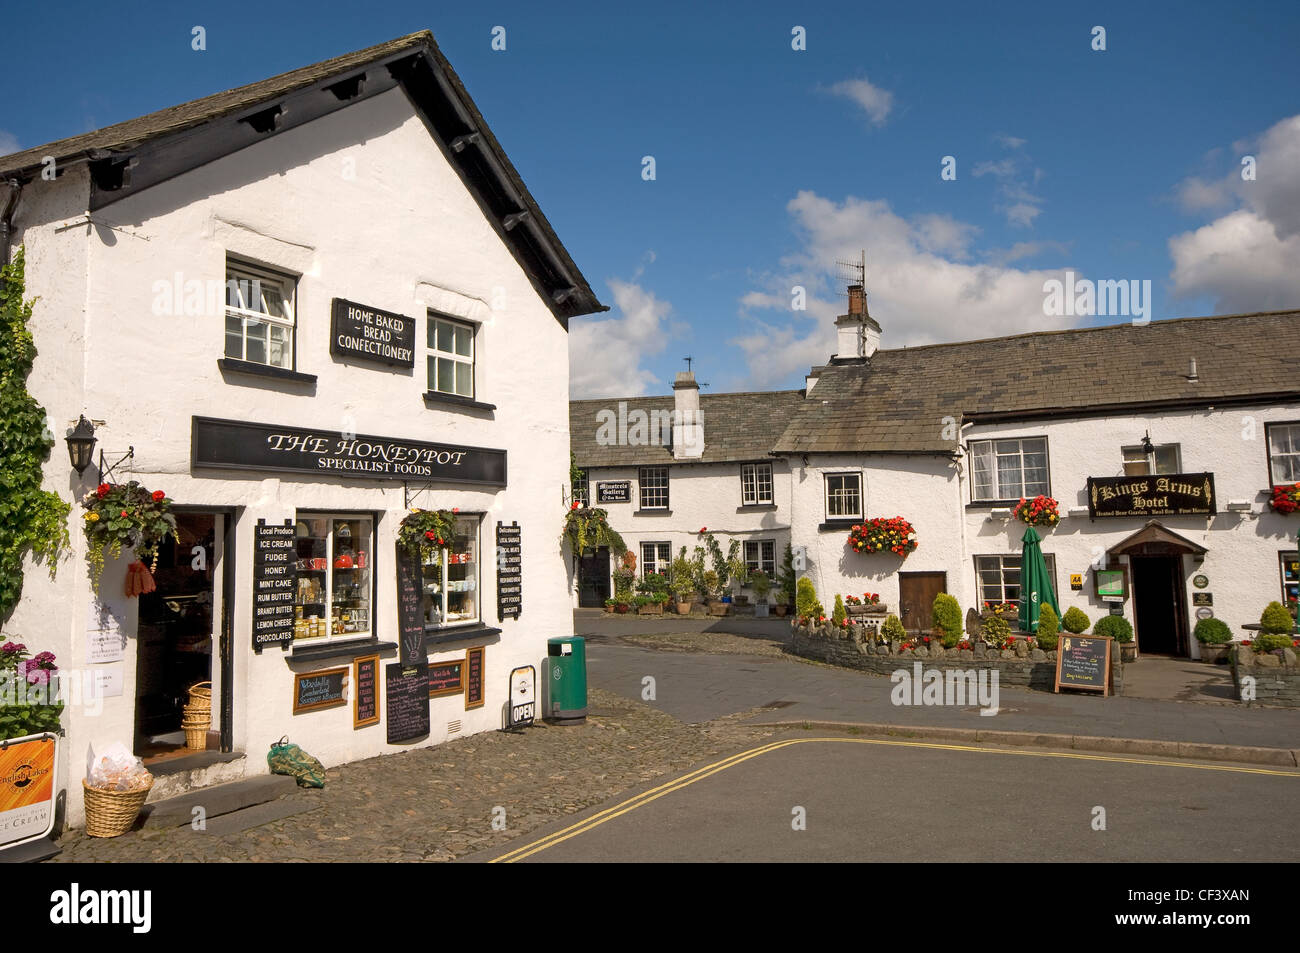 The Honeypot Specialist Foods shop and Kings Arms Hotel in the village of Hawkshead. Stock Photo